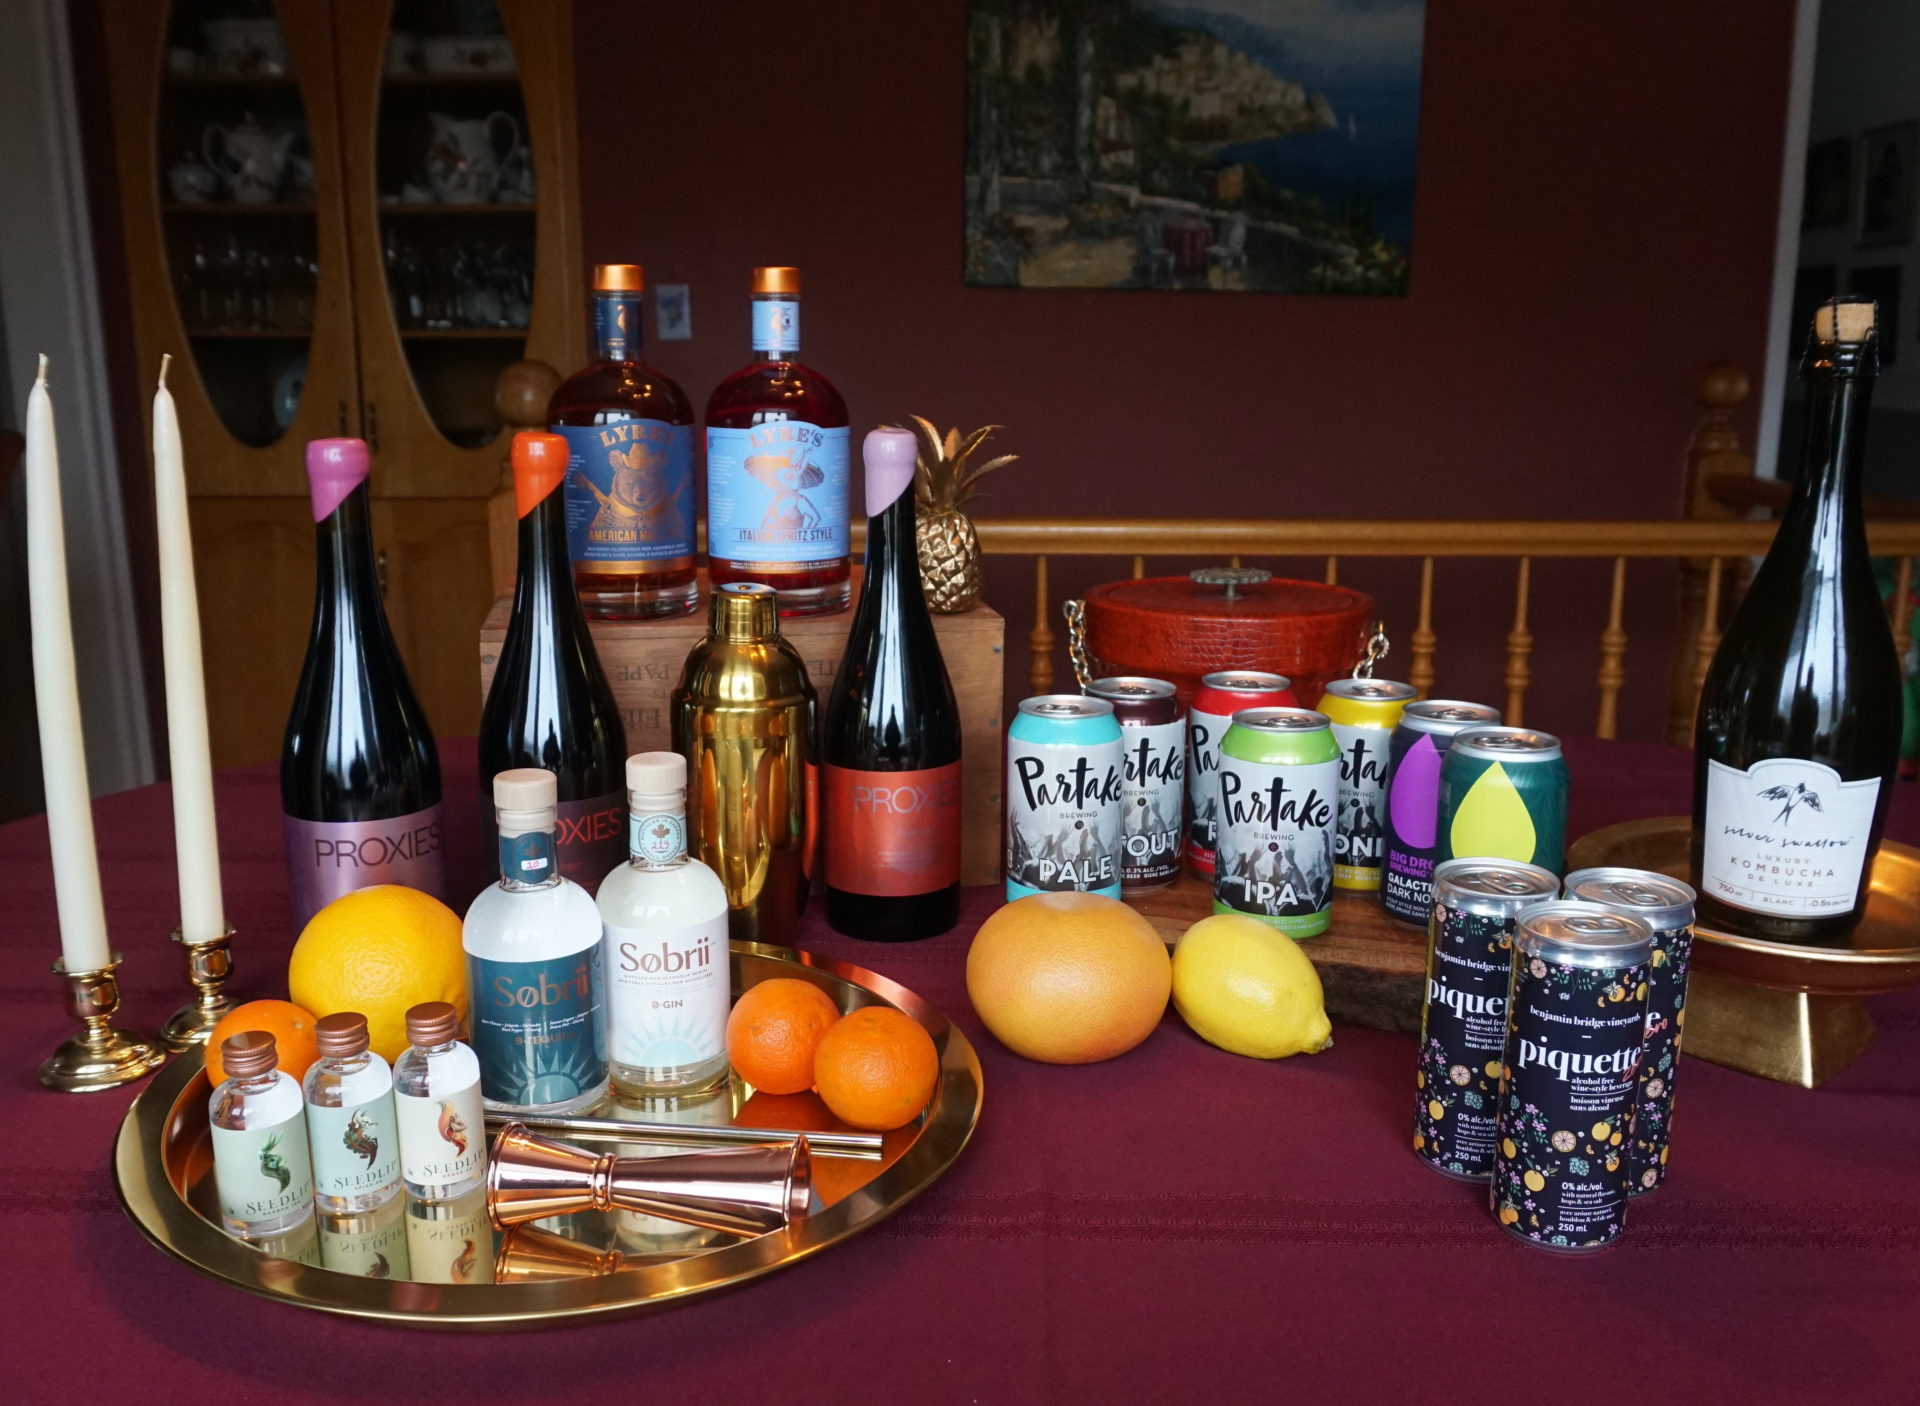 I Tried These: A Non-Alcoholic Tasting To Mark The New Year